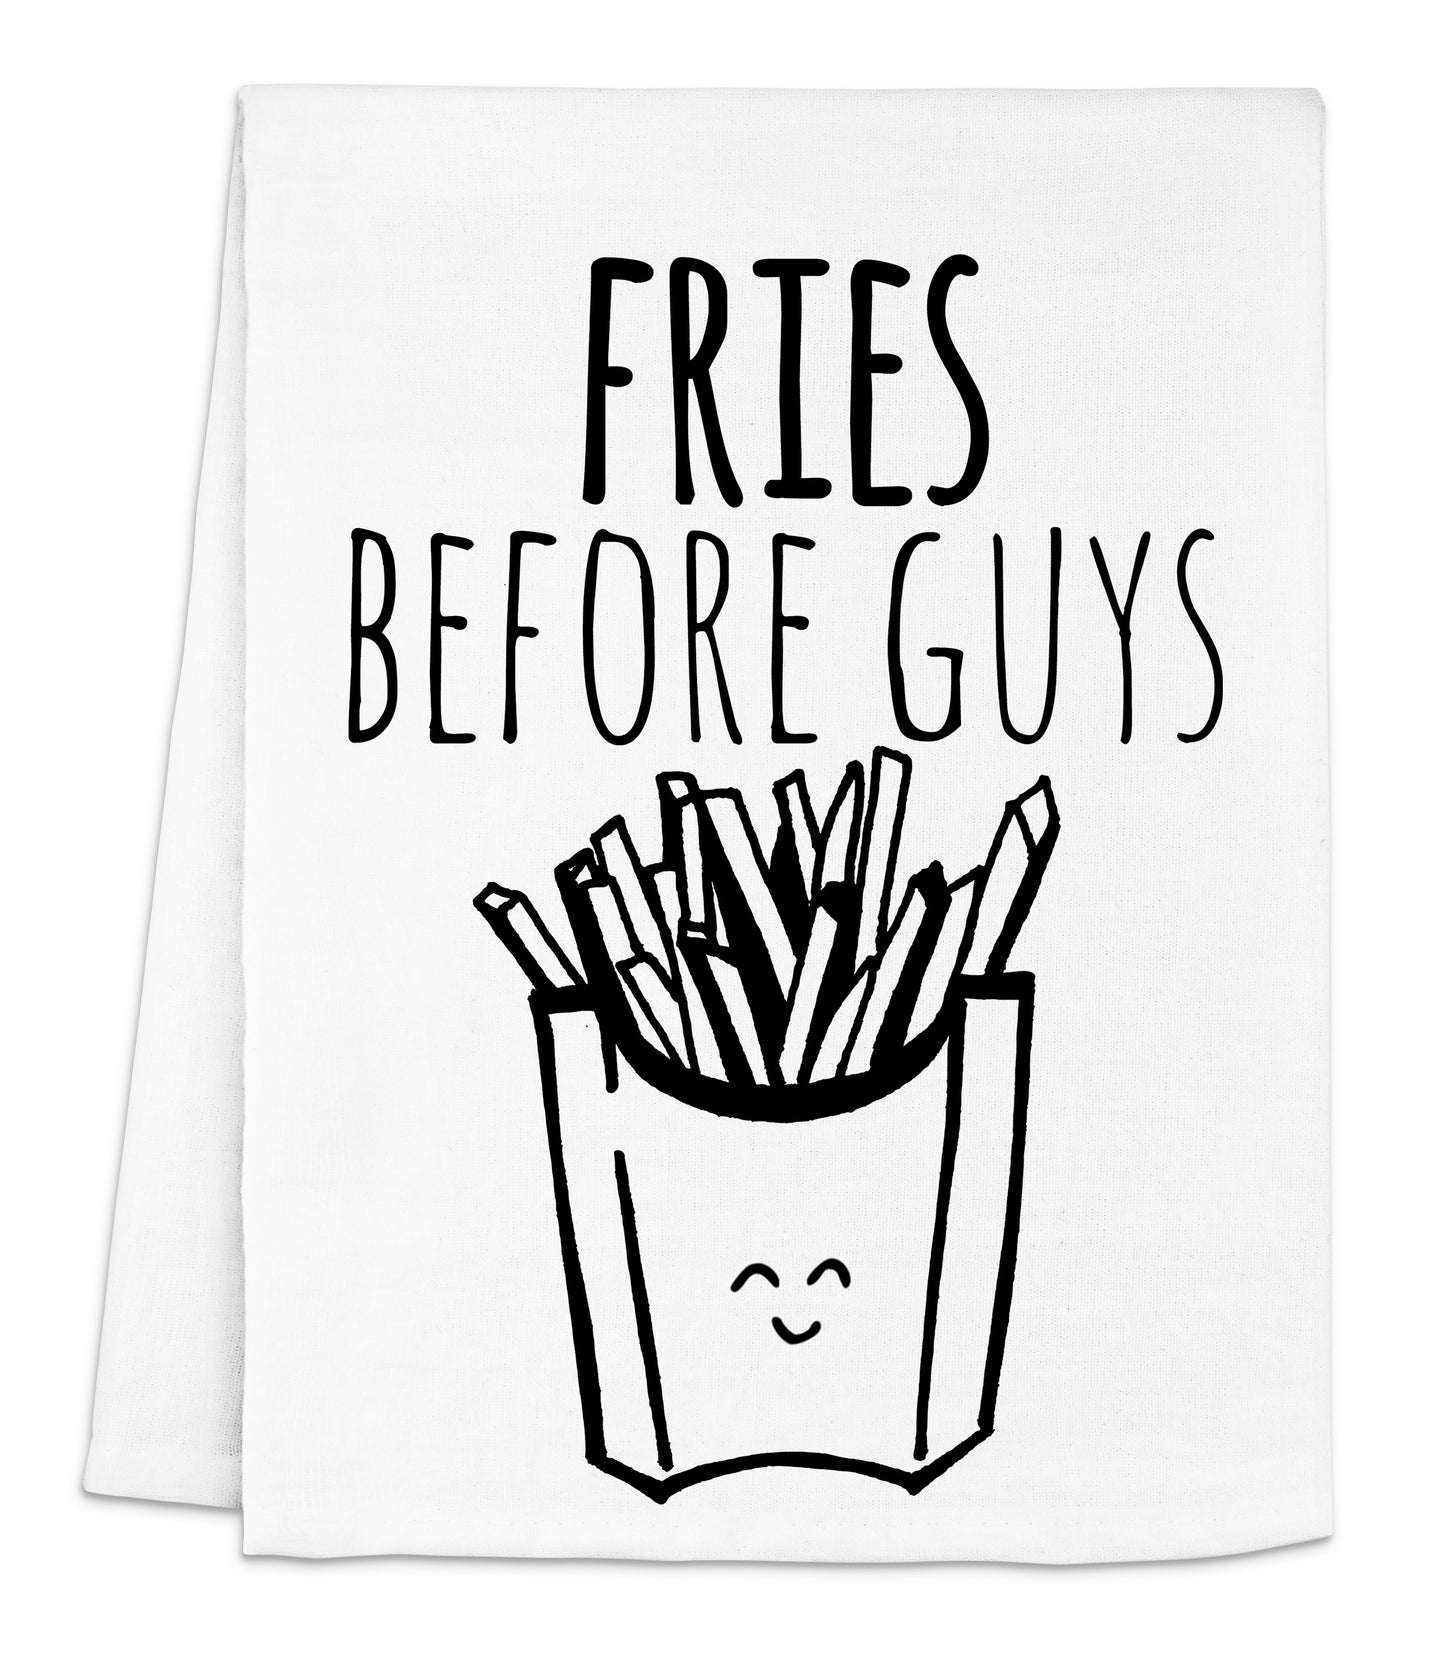 a napkin with fries before guys written on it